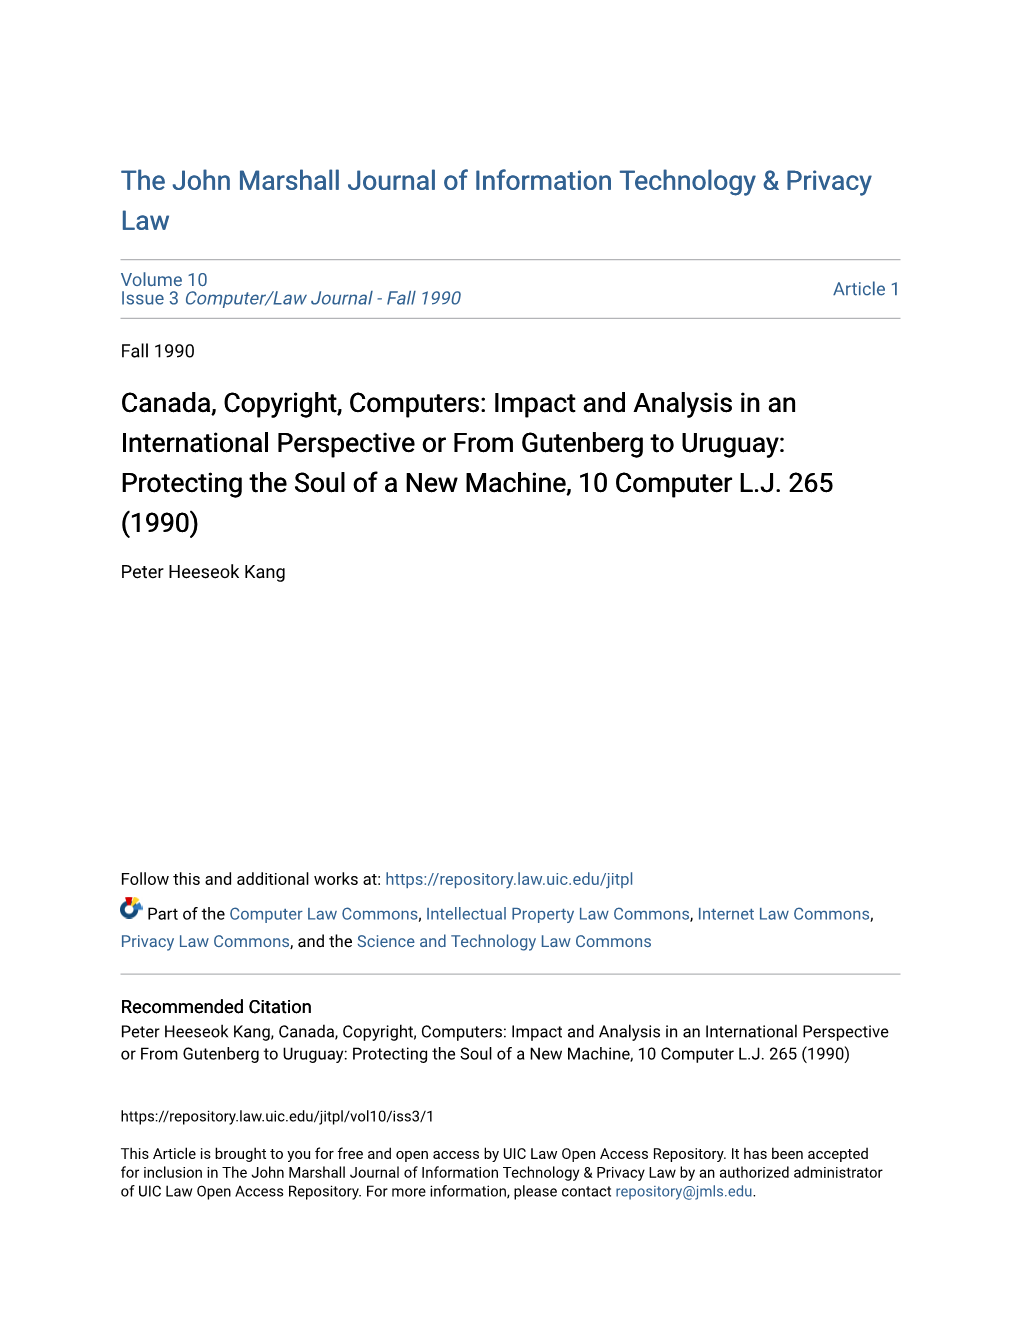 Canada, Copyright, Computers: Impact and Analysis in an International Perspective Or from Gutenberg to Uruguay: Protecting the Soul of a New Machine, 10 Computer L.J